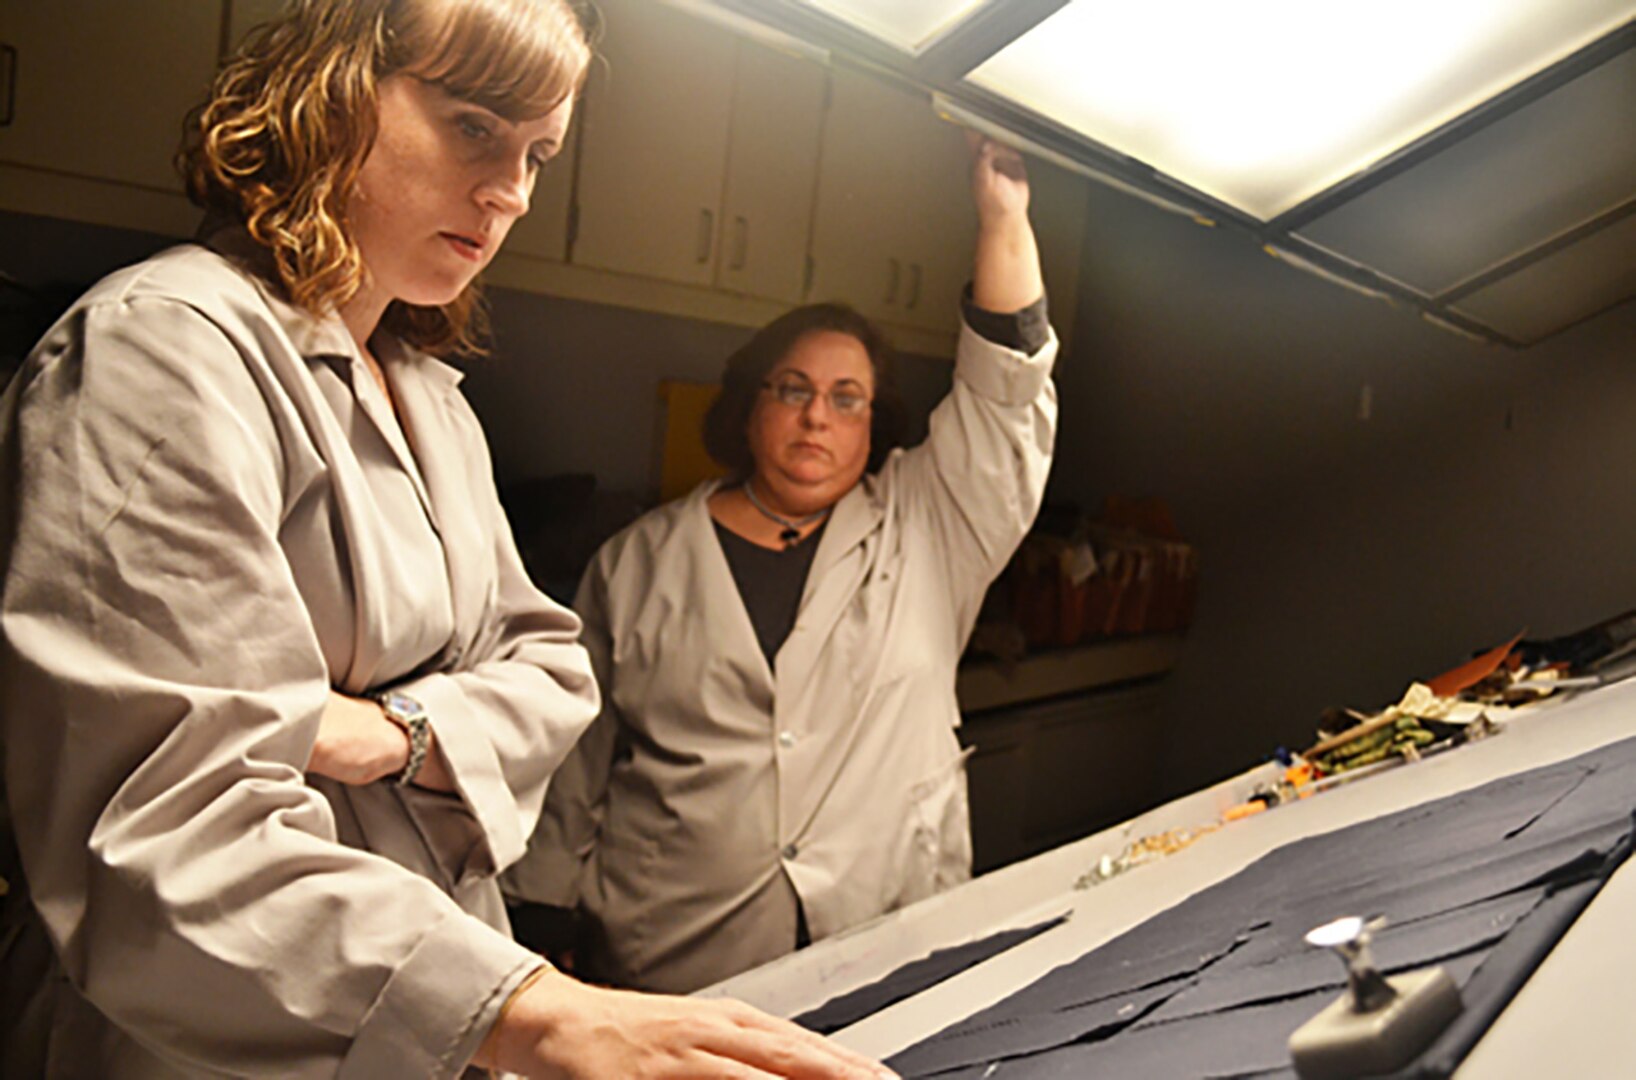 Defense Logistics Agency Product Testing Center color scientists Ardra Farally (left) and Jamie Hieber analyze a fabric sample against Coast Guard uniform standards and tolerances in the center's color shading laboratory. The two conduct color science testing on every piece of fabric the military buys through DLA Troop Support's clothing and textiles supply chain.